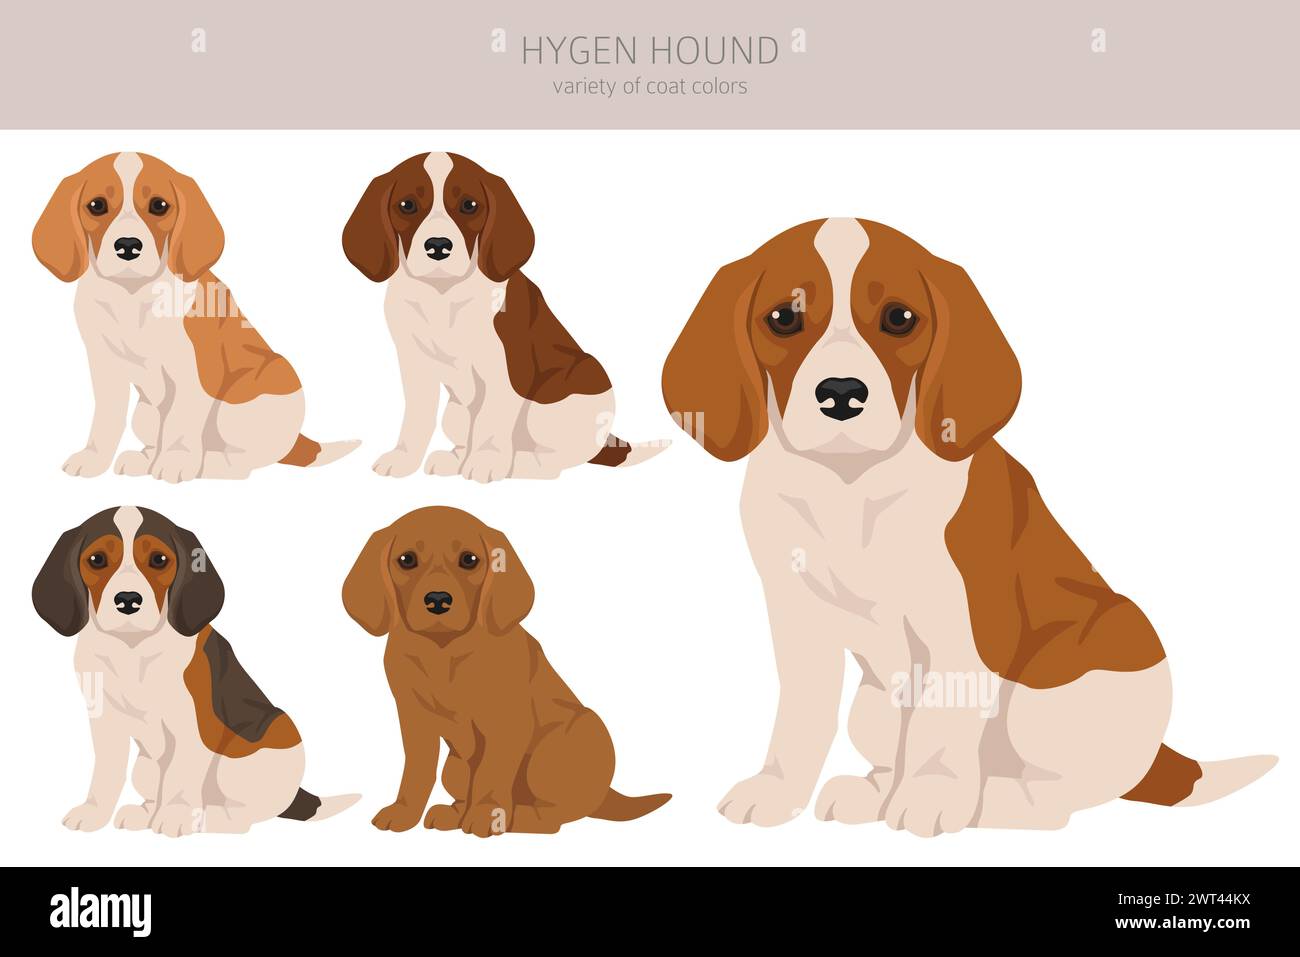 Hygen hound puppy clipart. Different poses, coat colors set.  Vector illustration Stock Vector